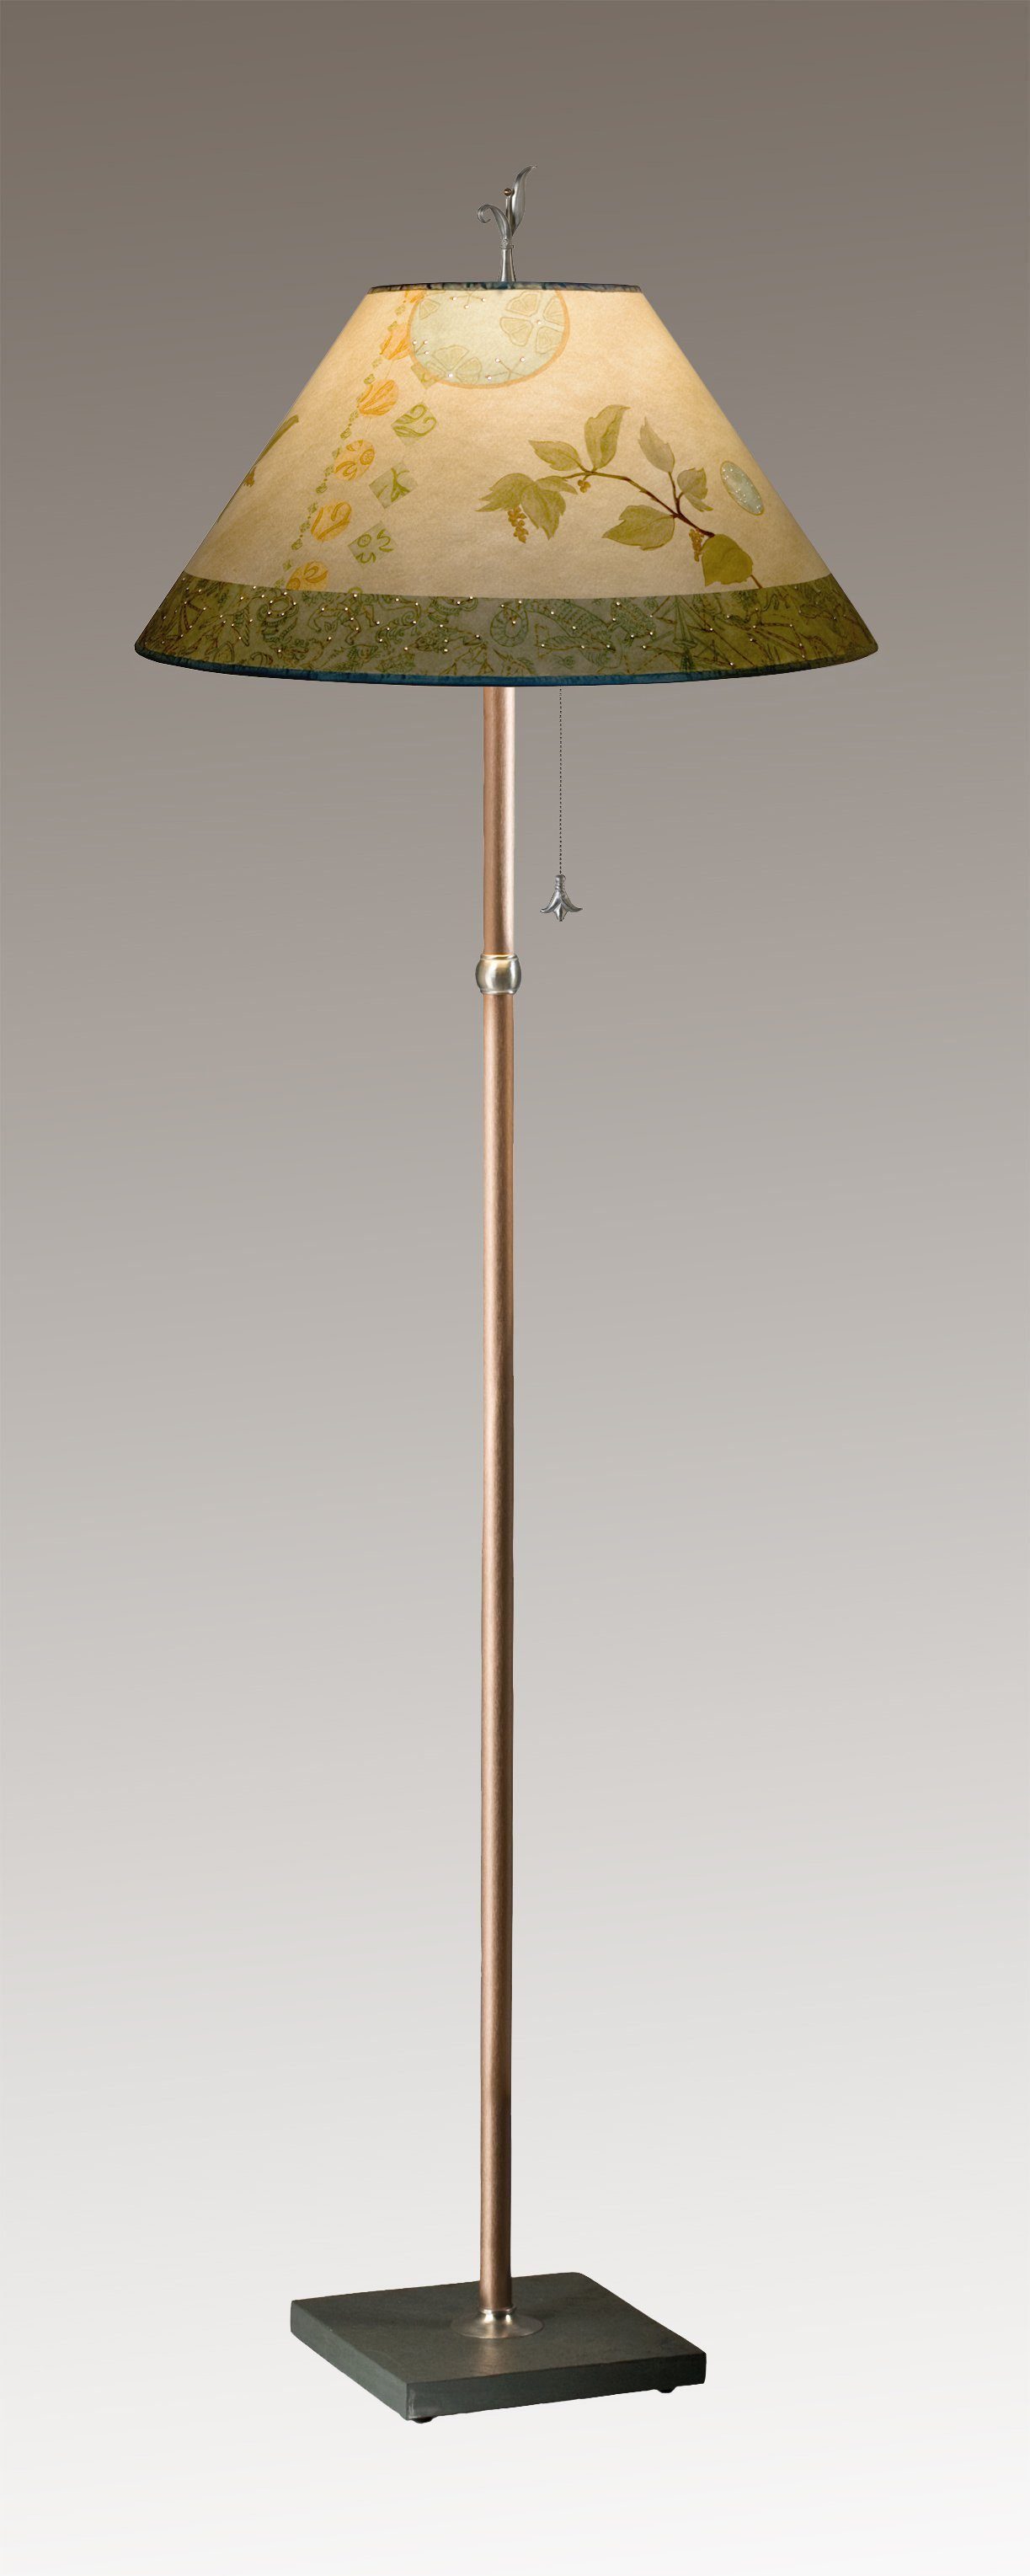 Janna Ugone & Co Floor Lamps Copper Floor Lamp with Large Conical Shade in Celestial Leaf